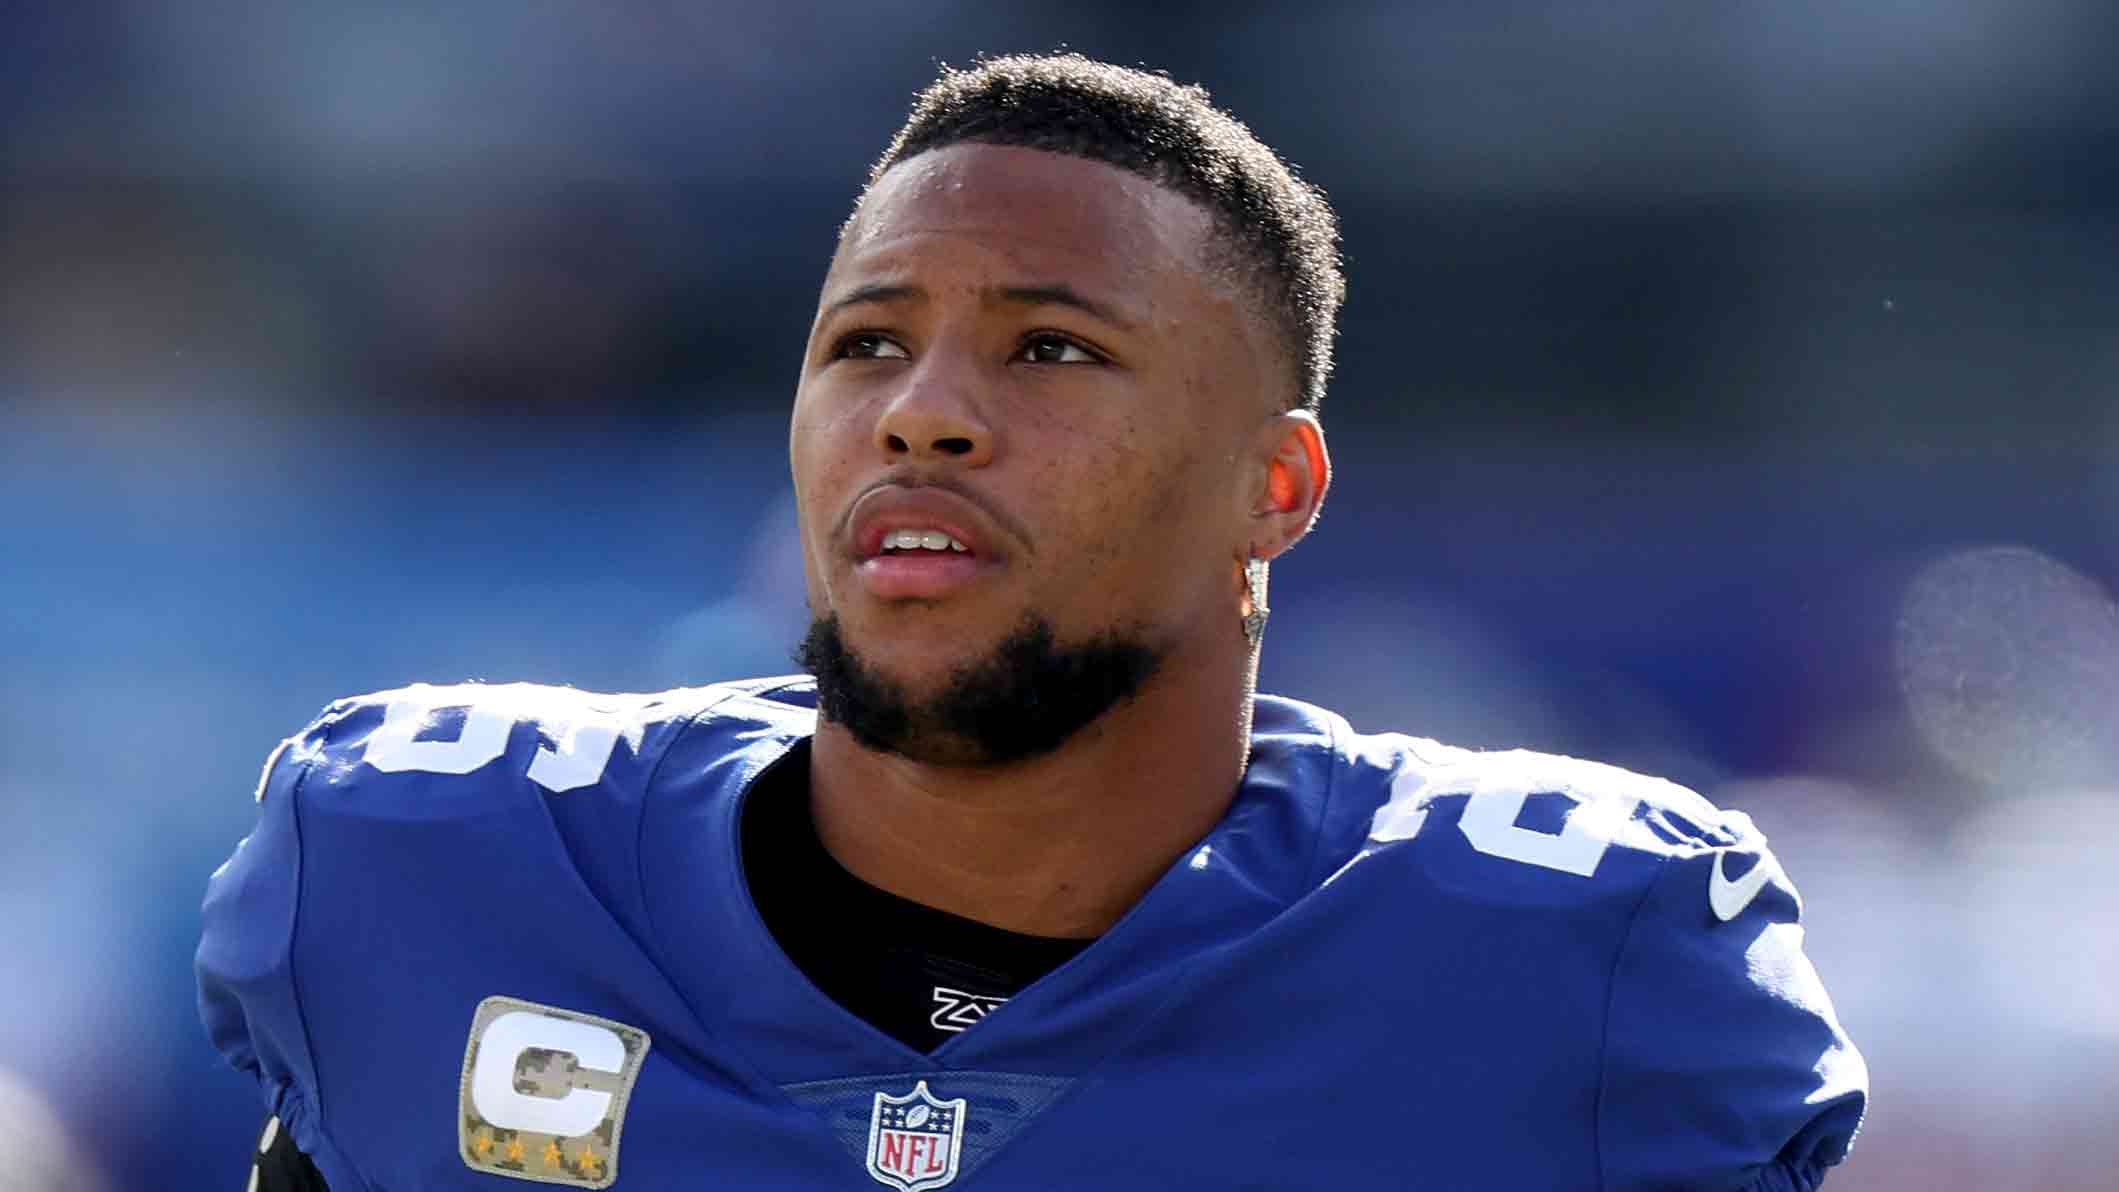 Saquon Barkley isn't going to the Pro Bowl, but he has bigger